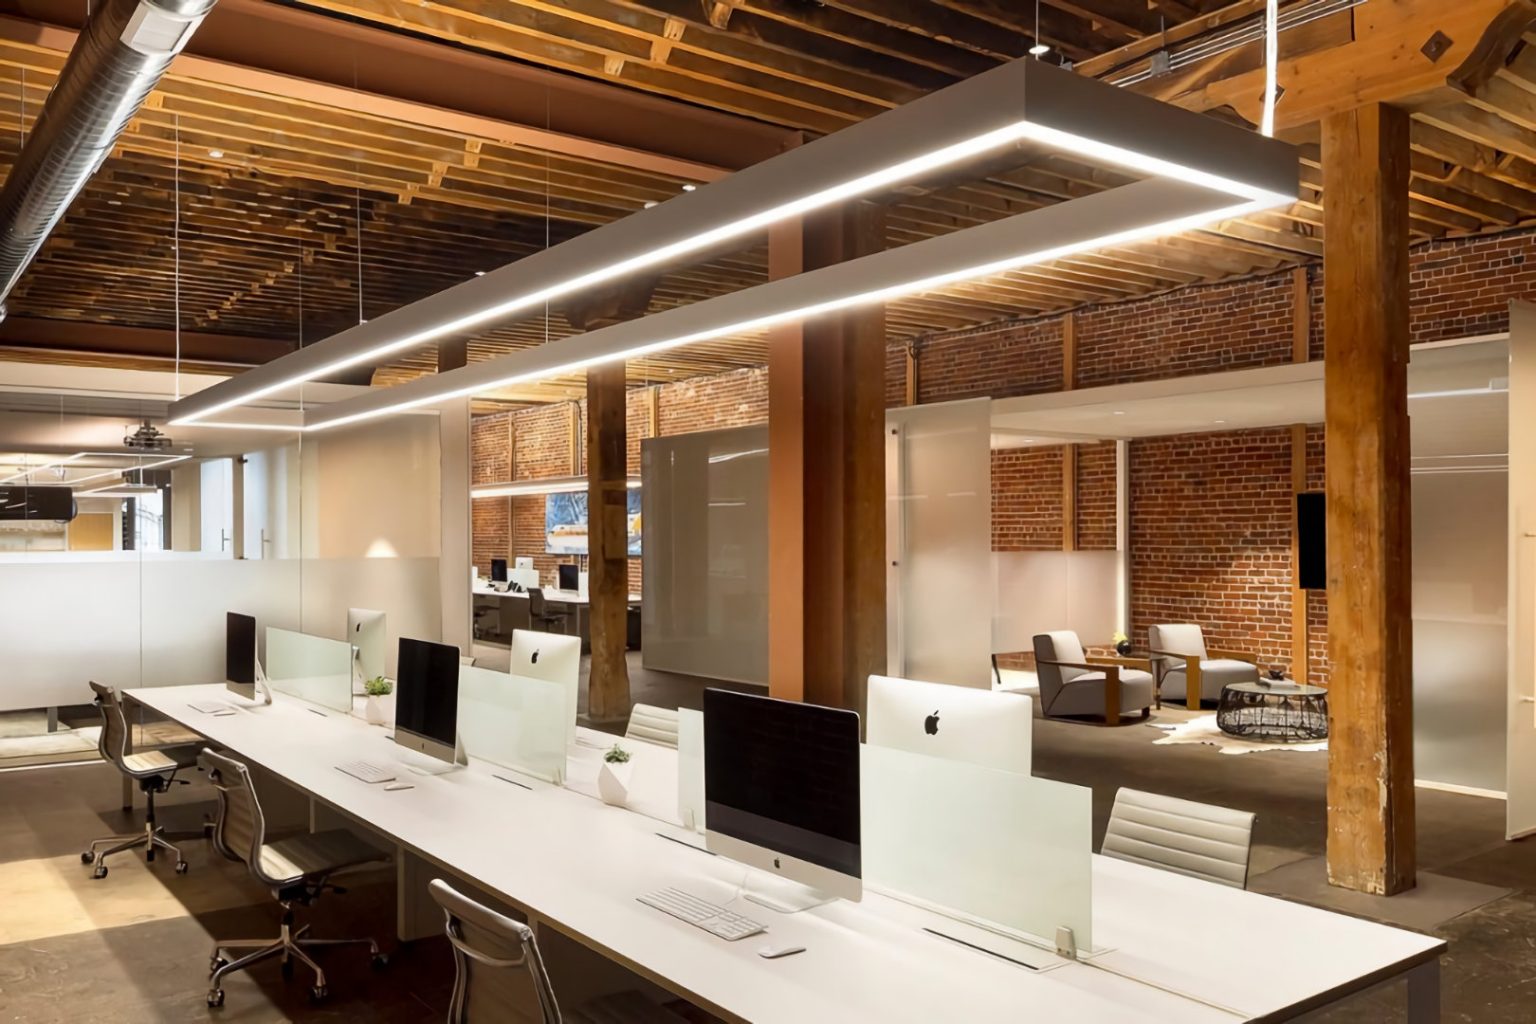 led lighting above office desk installed by micron group